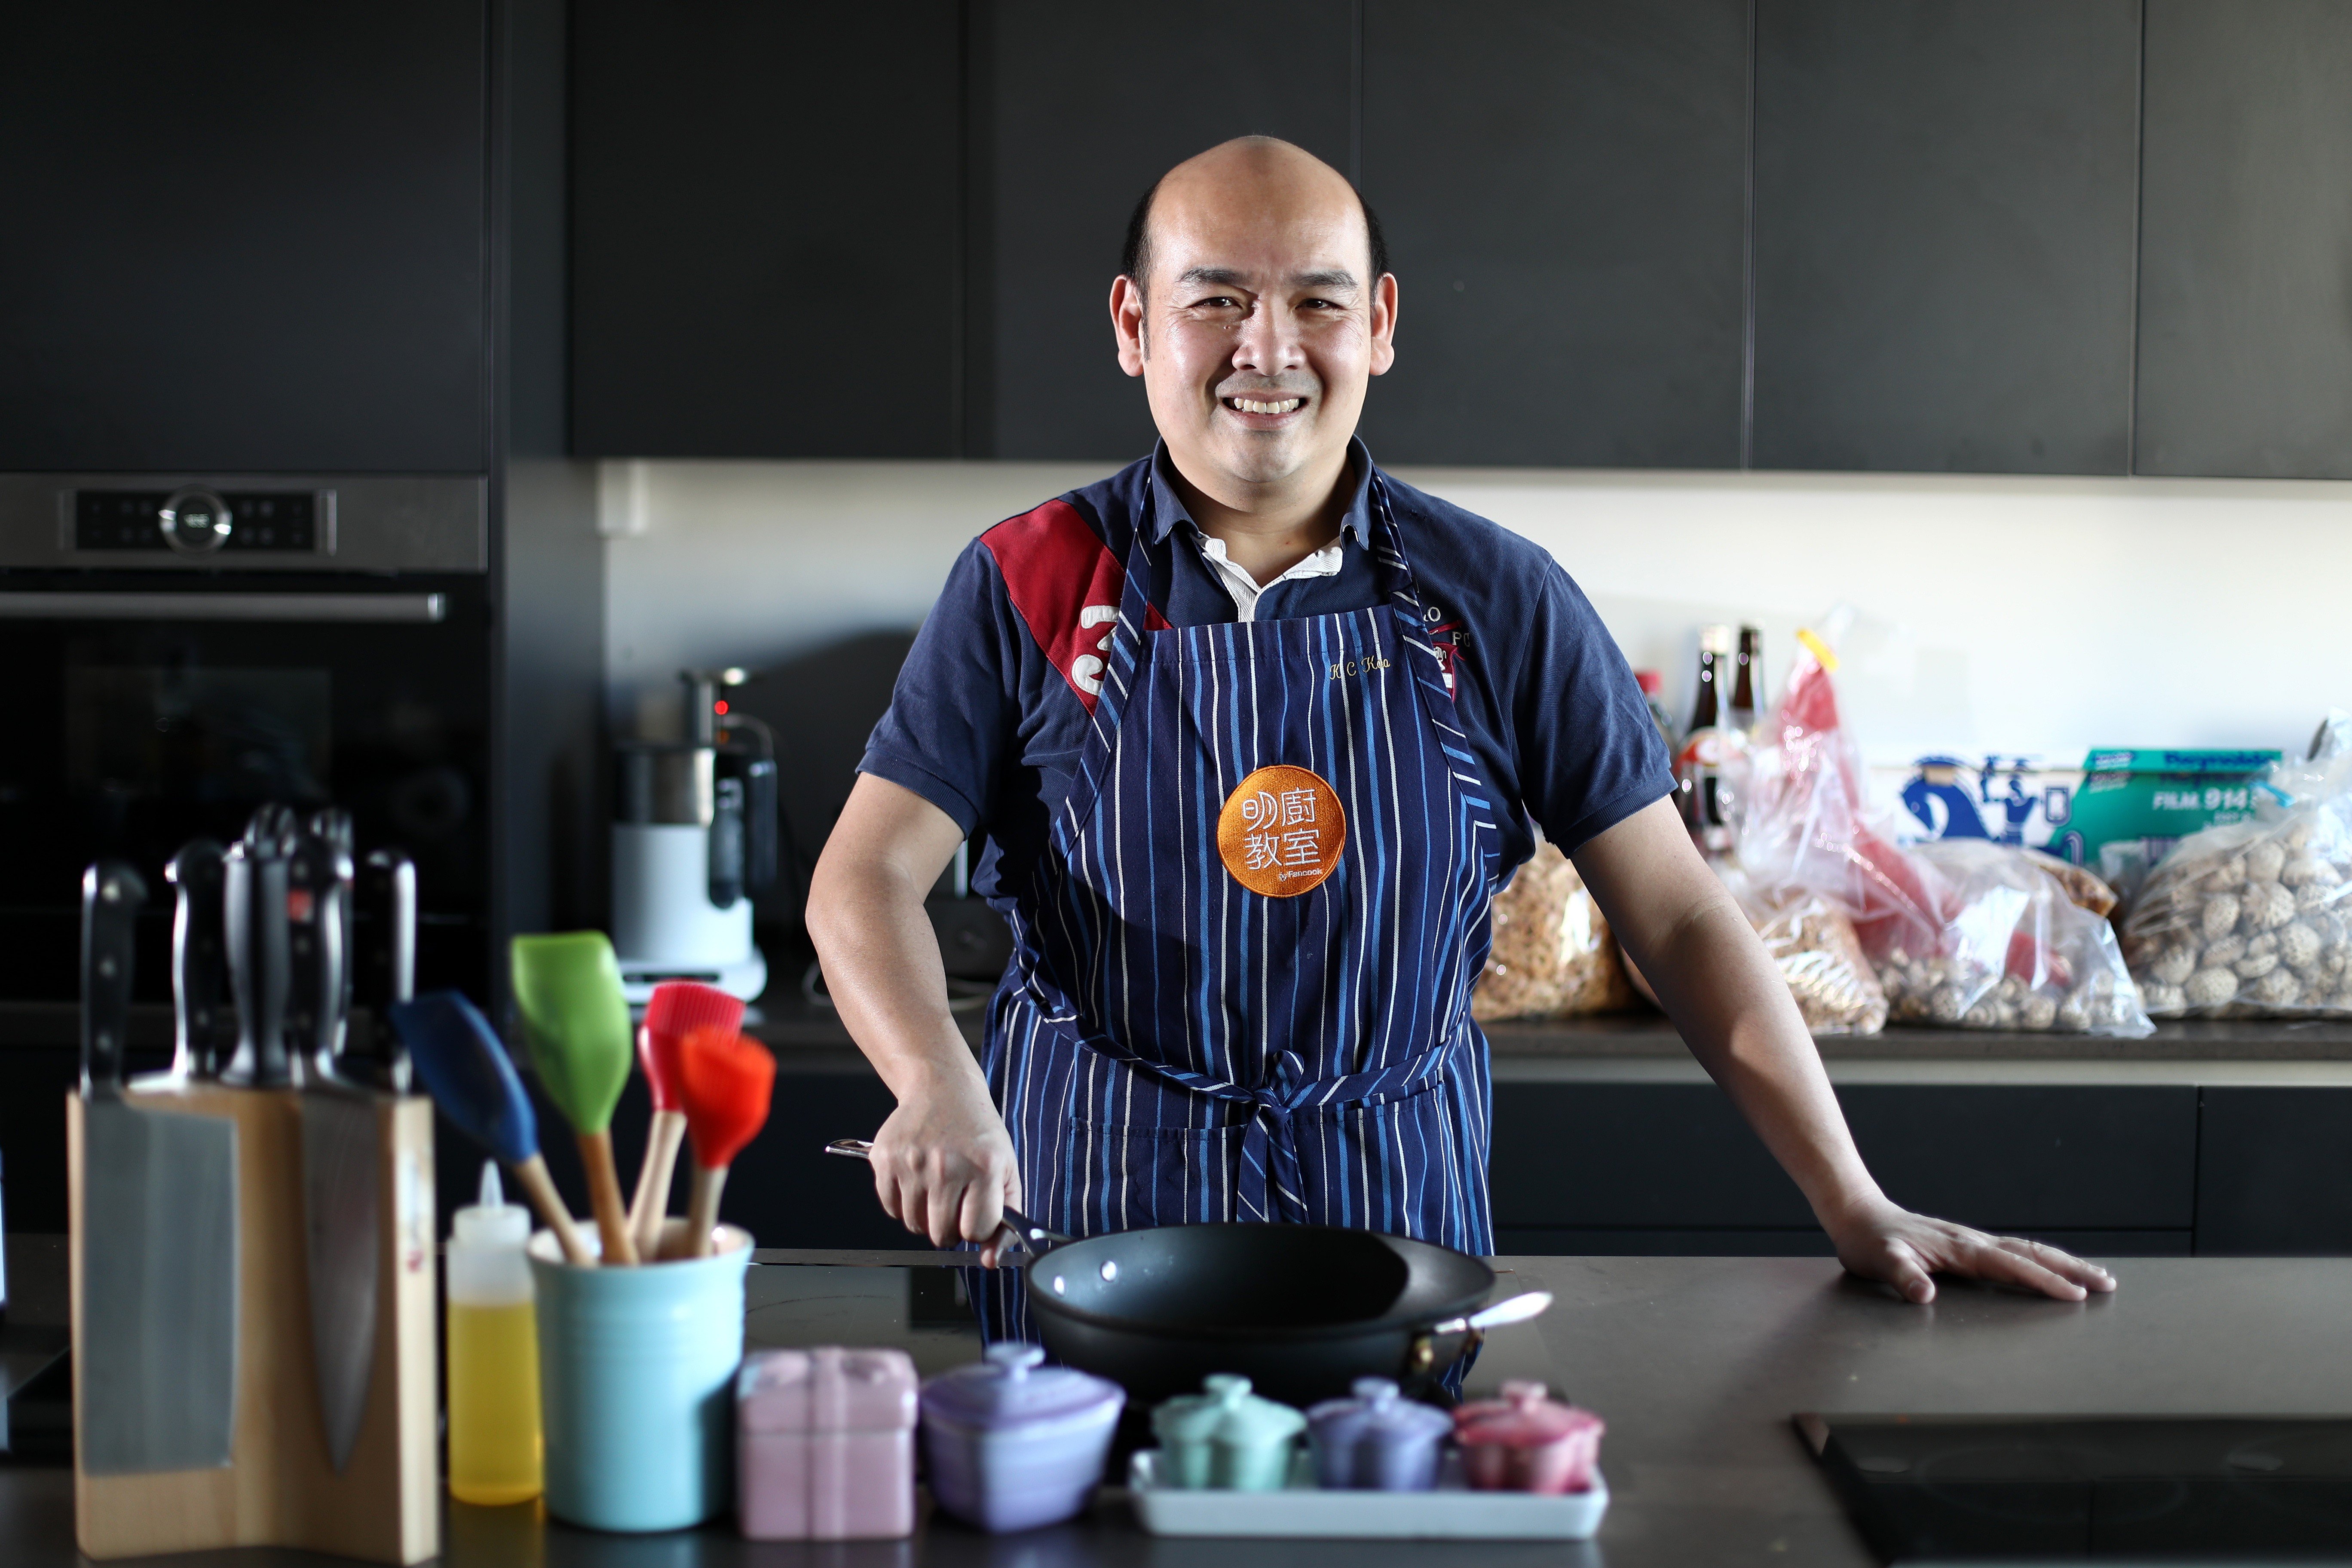 K.C. Koo in the kitchen. Pictures: Nora Tam